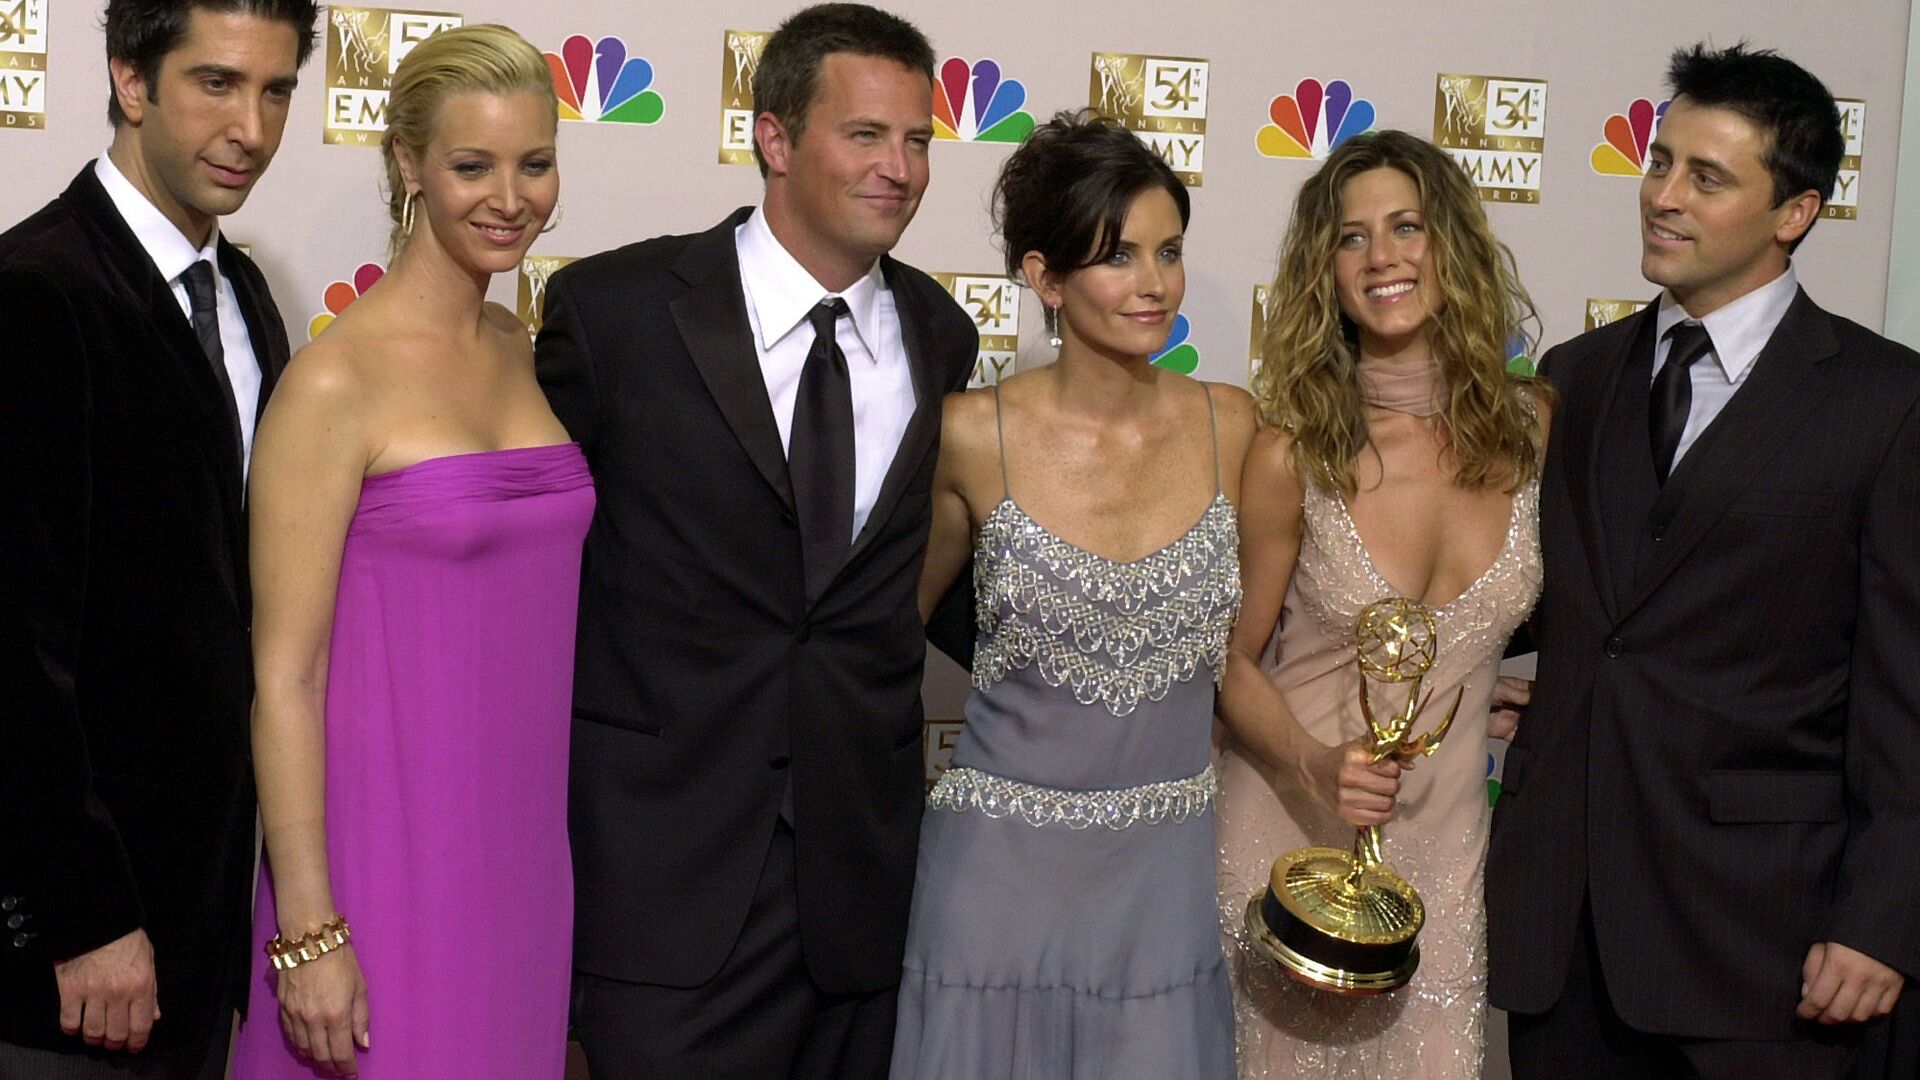 the cast of Friends, from left, David Schwimmer, Lisa Kudrow, Matthew Perry, Courteney Cox, Jennifer Aniston and Matt LeBlanc pose in the press room with the award for outstanding comedy series at the 54th annual Primetime Emmy Awards in Los Angeles - Sputnik International, 1920, 14.05.2021